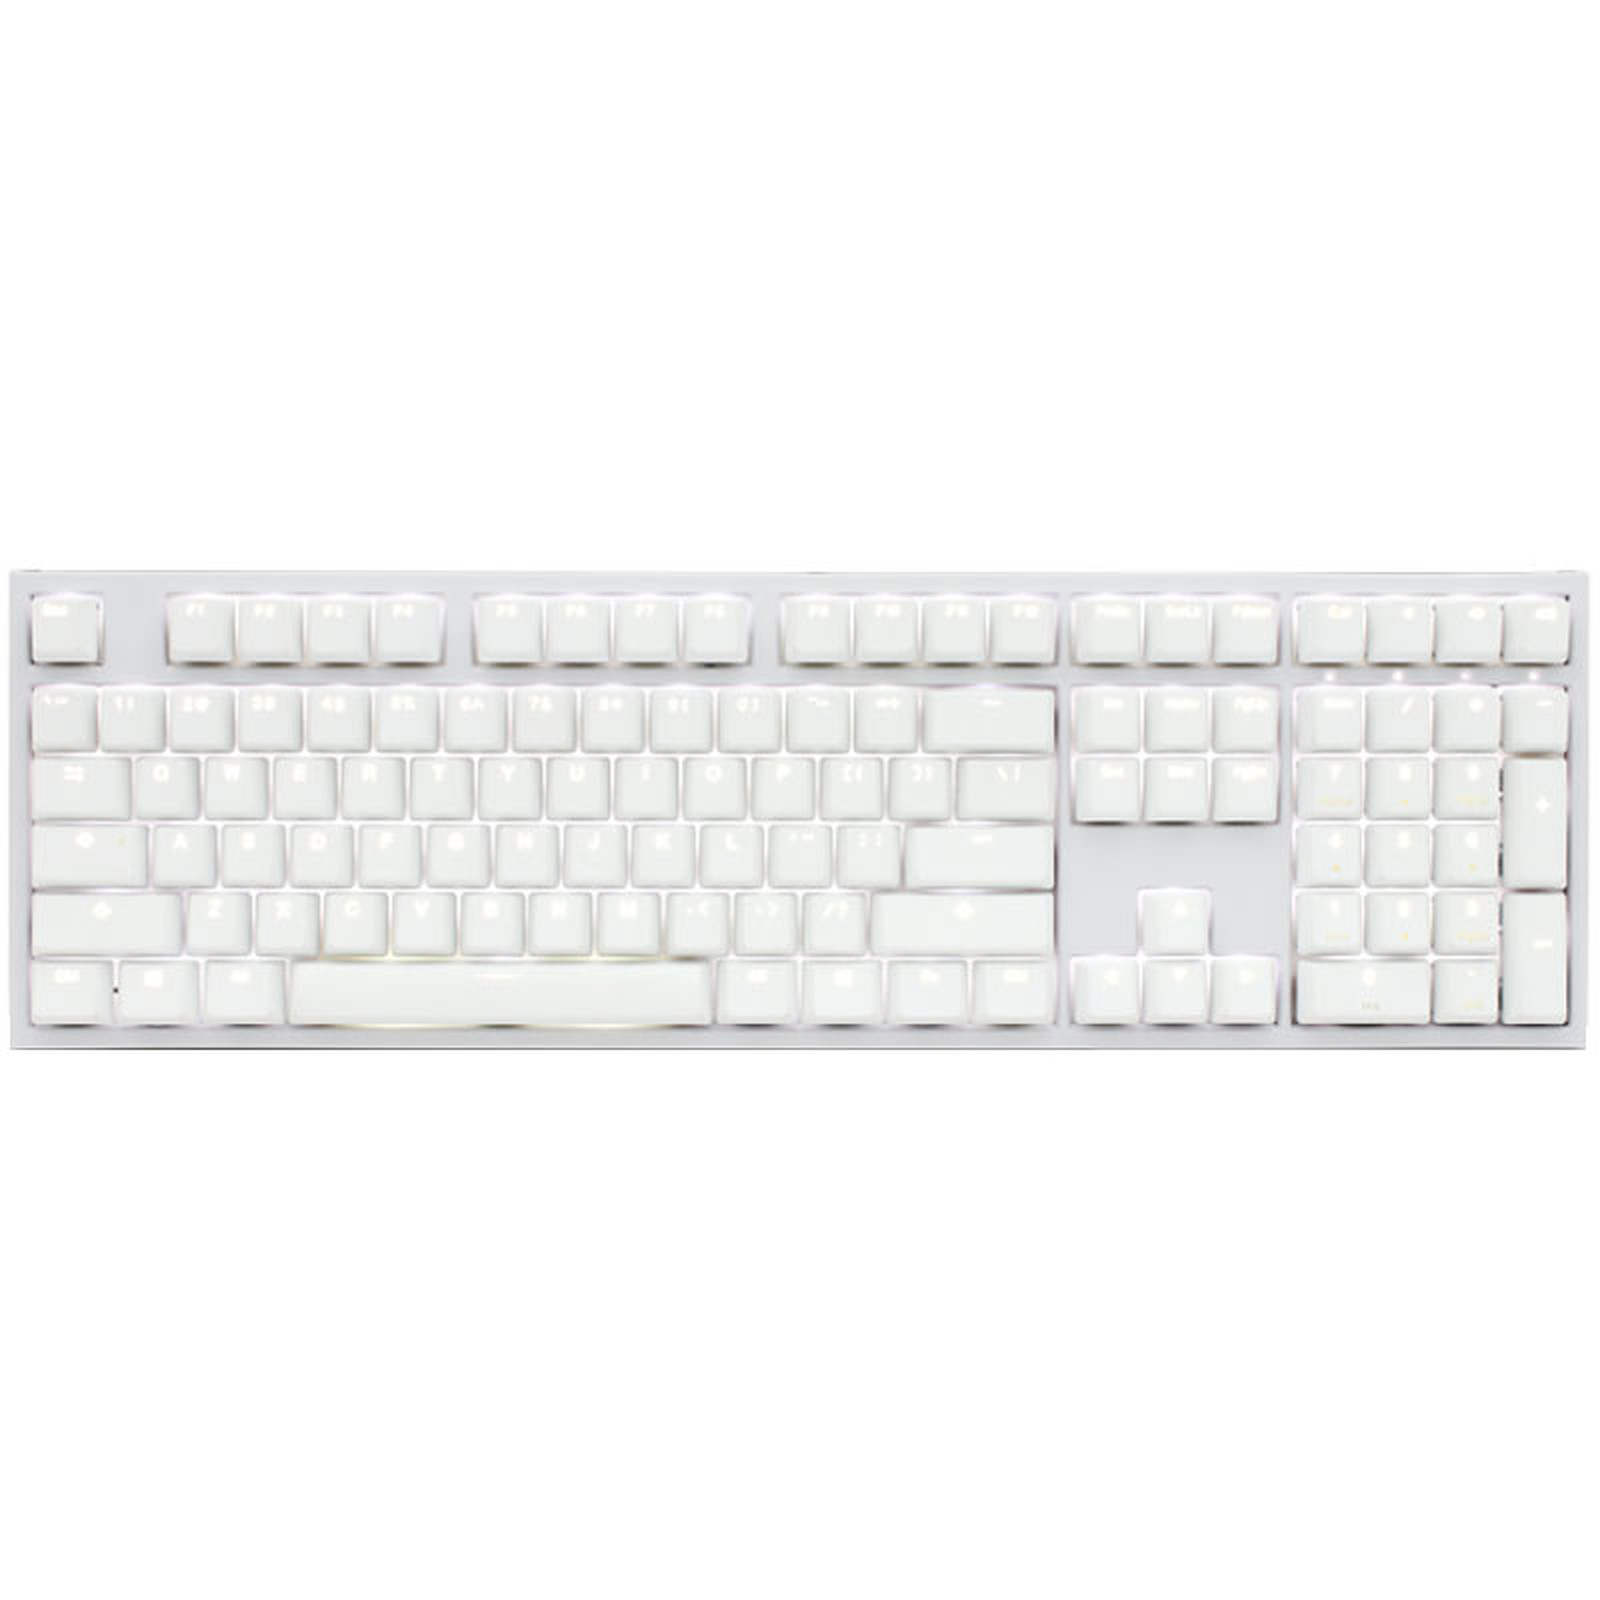 Ducky Channel One 2 Backlit (coloris blanc - Cherry MX Black - LEDs blanches) - Clavier PC Ducky Channel